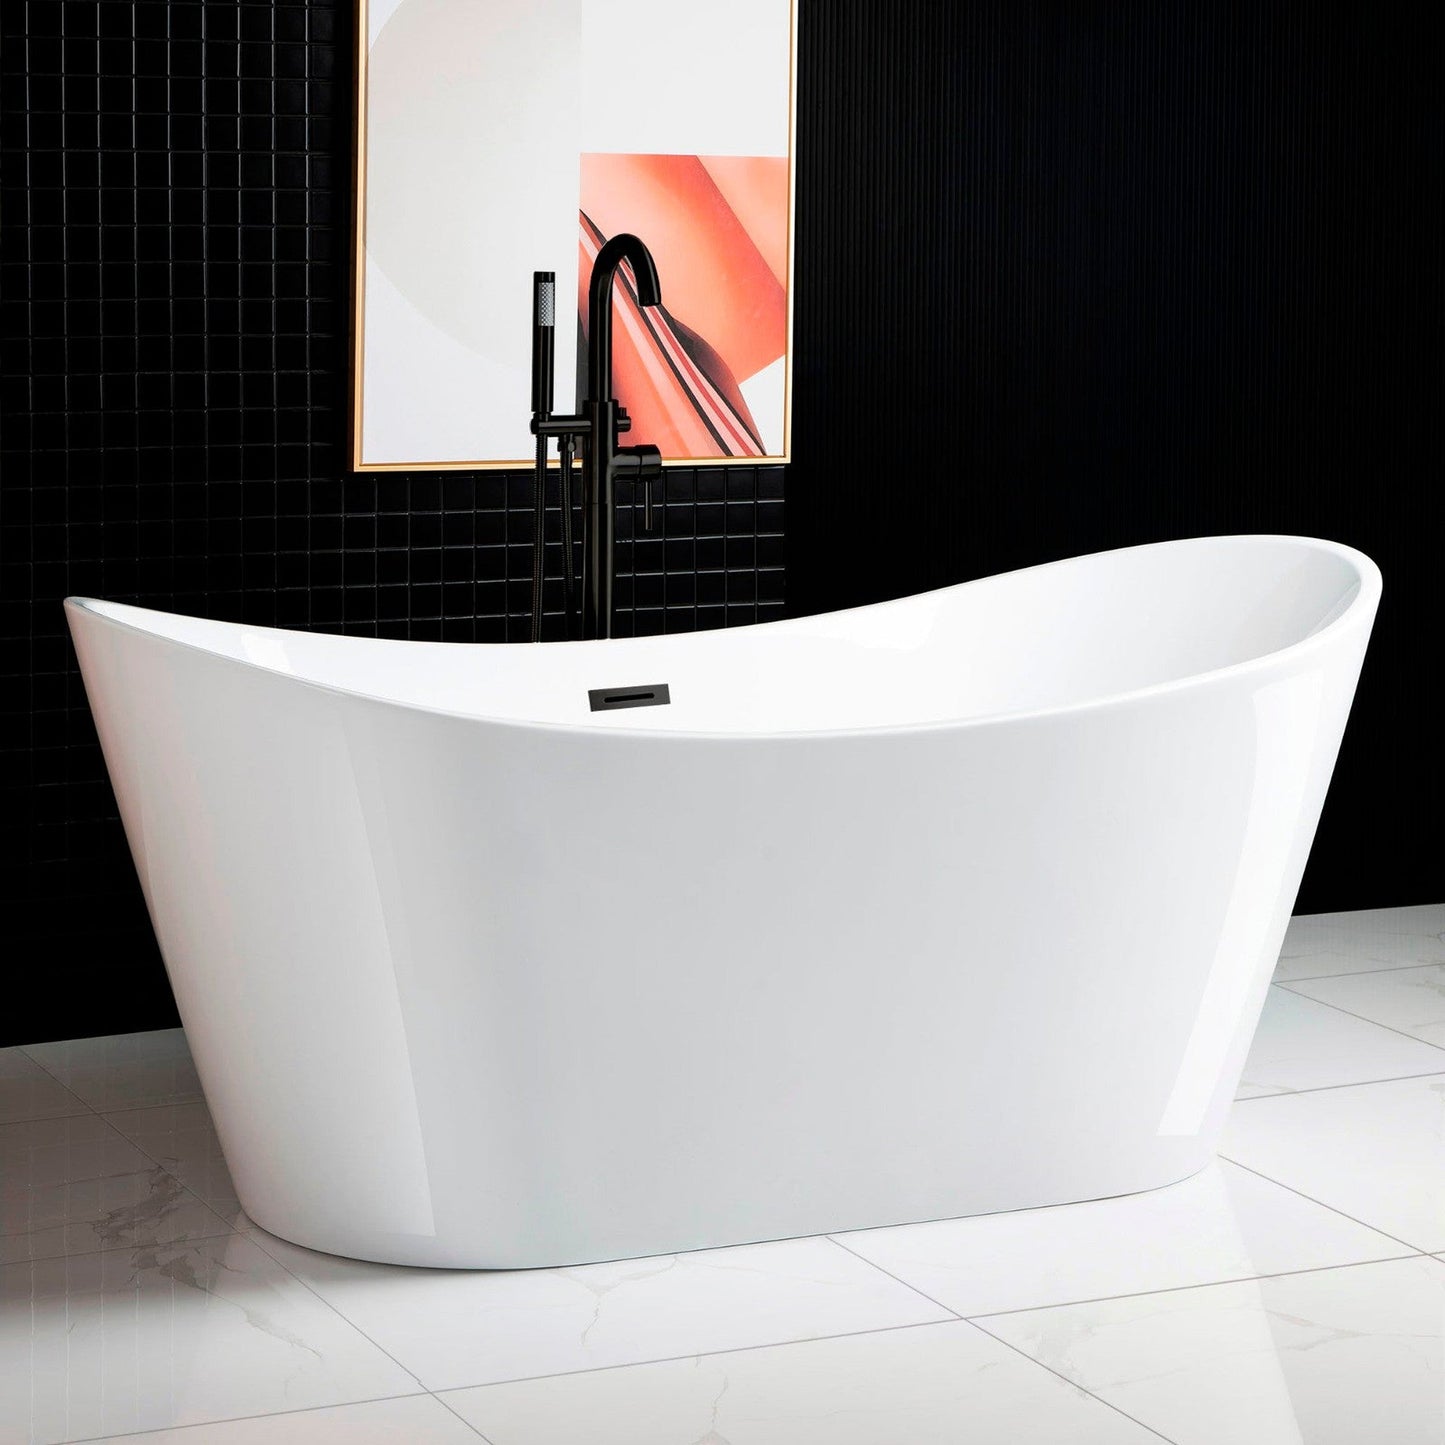 WoodBridge B0010 67" White Acrylic Freestanding Contemporary Soaking Bathtub With Matte Black Drain, Overflow, F0025MBSQ Tub Filler and Caddy Tray